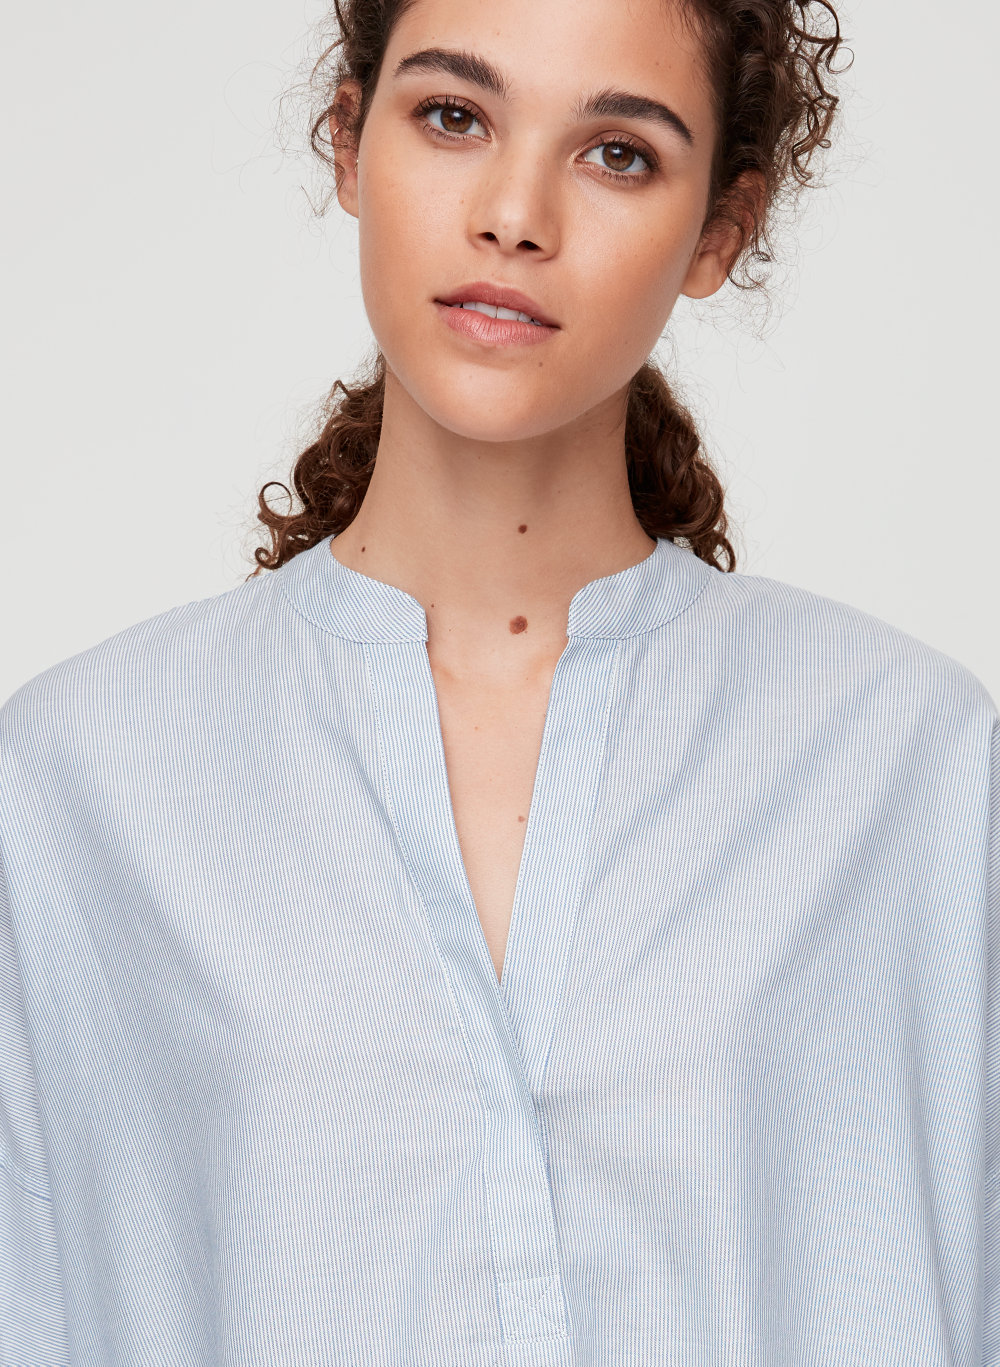 The Group by Babaton NELL BLOUSE | Aritzia US